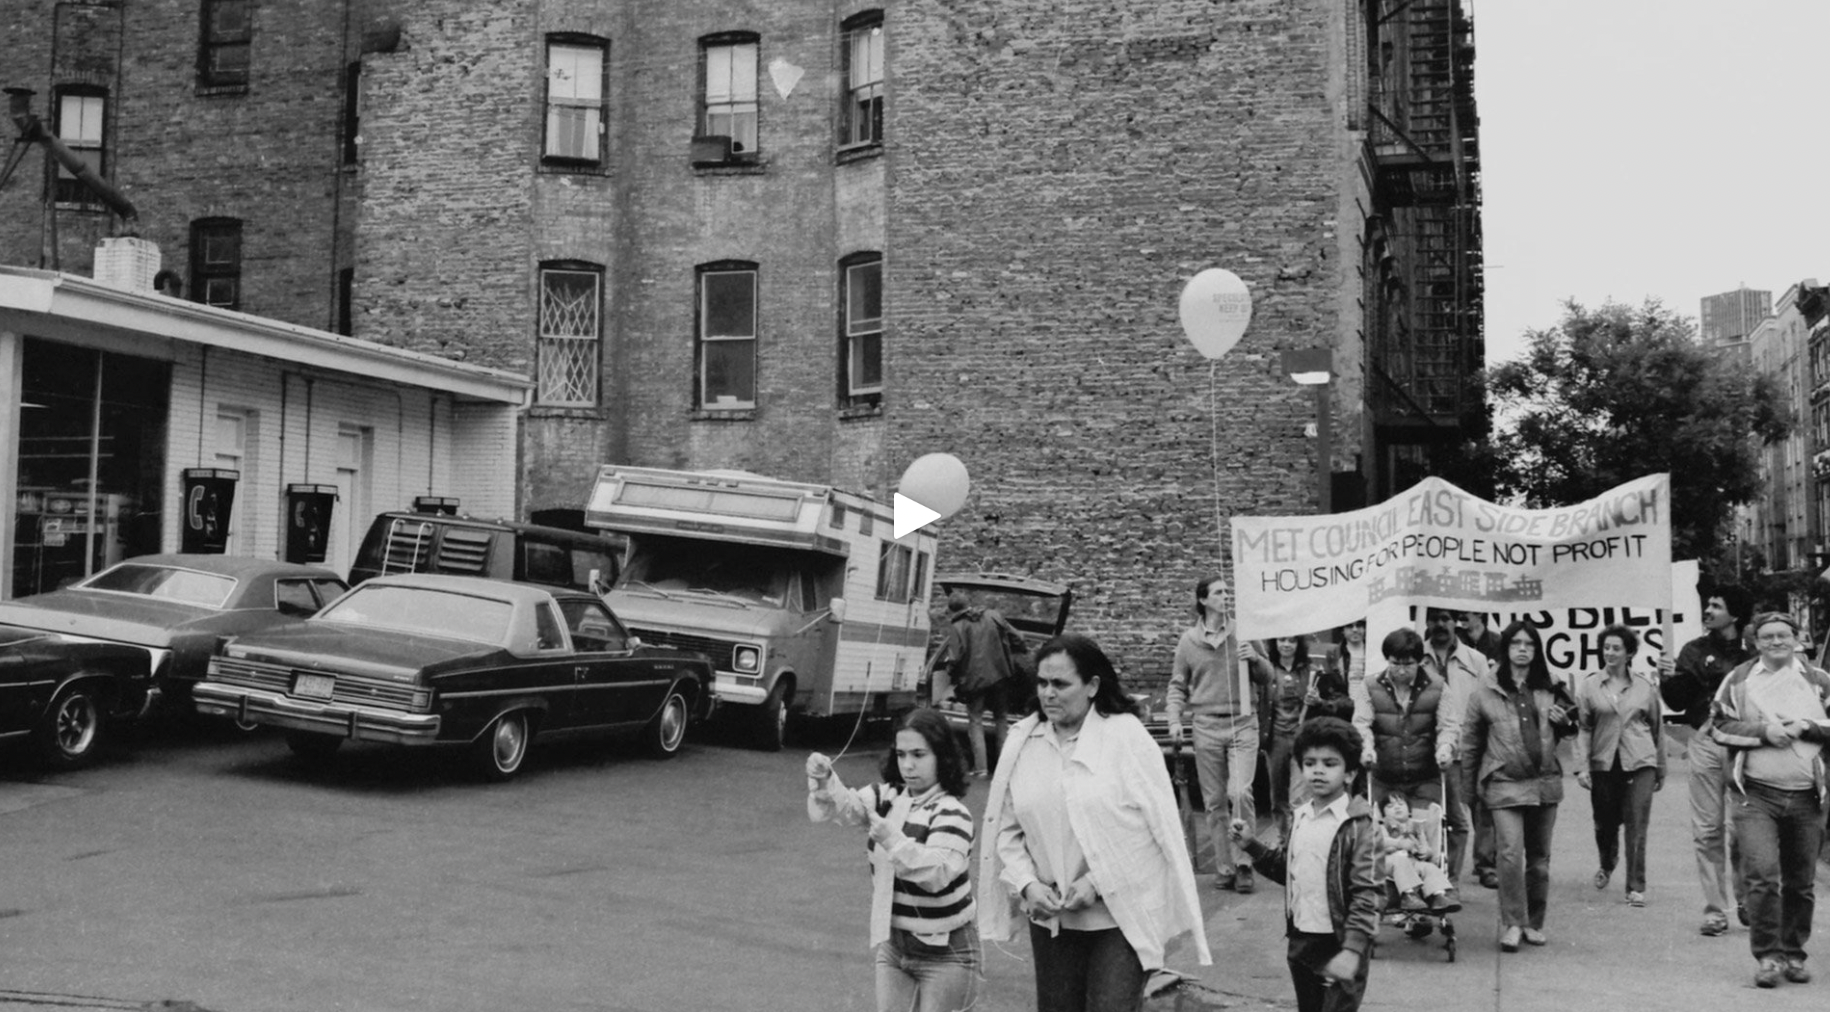 A black and white image of a protest, where one of the large banners read the phrase 